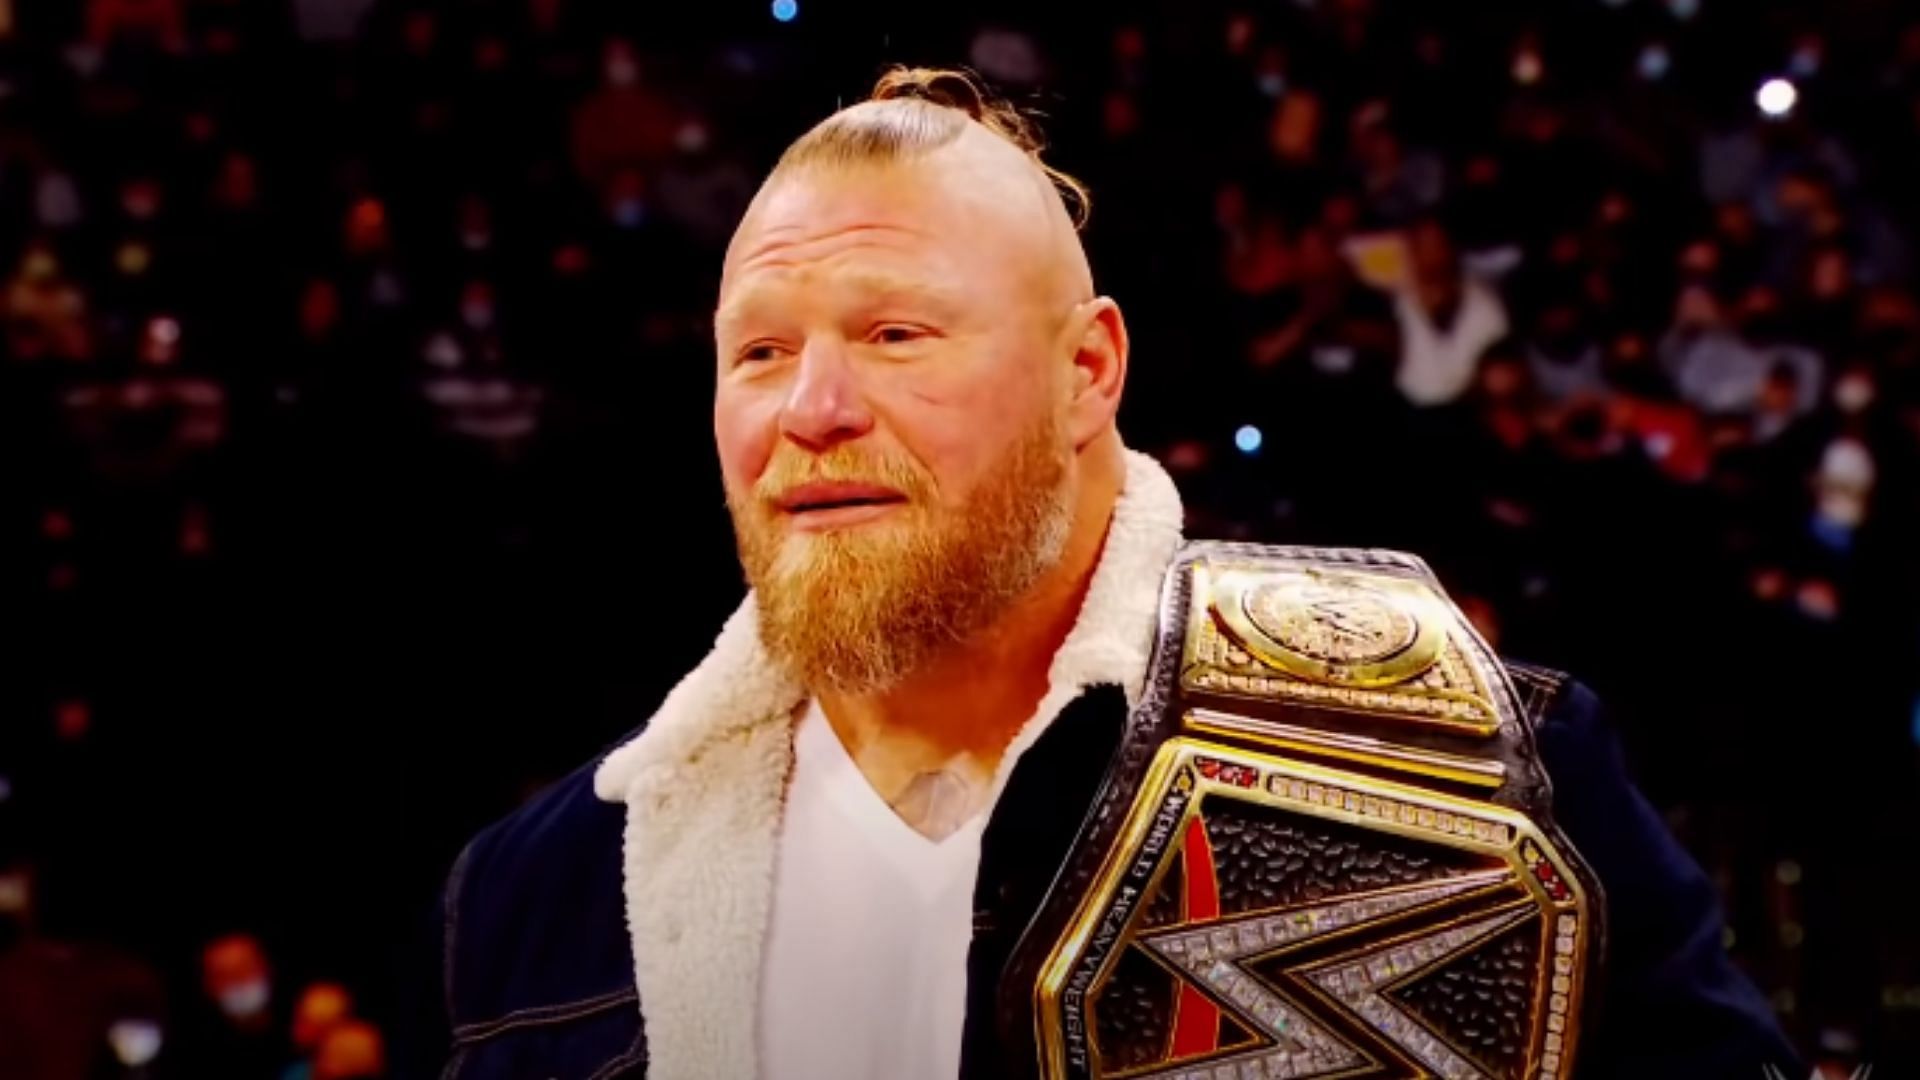 Brock Lesnar is the current WWE Champion